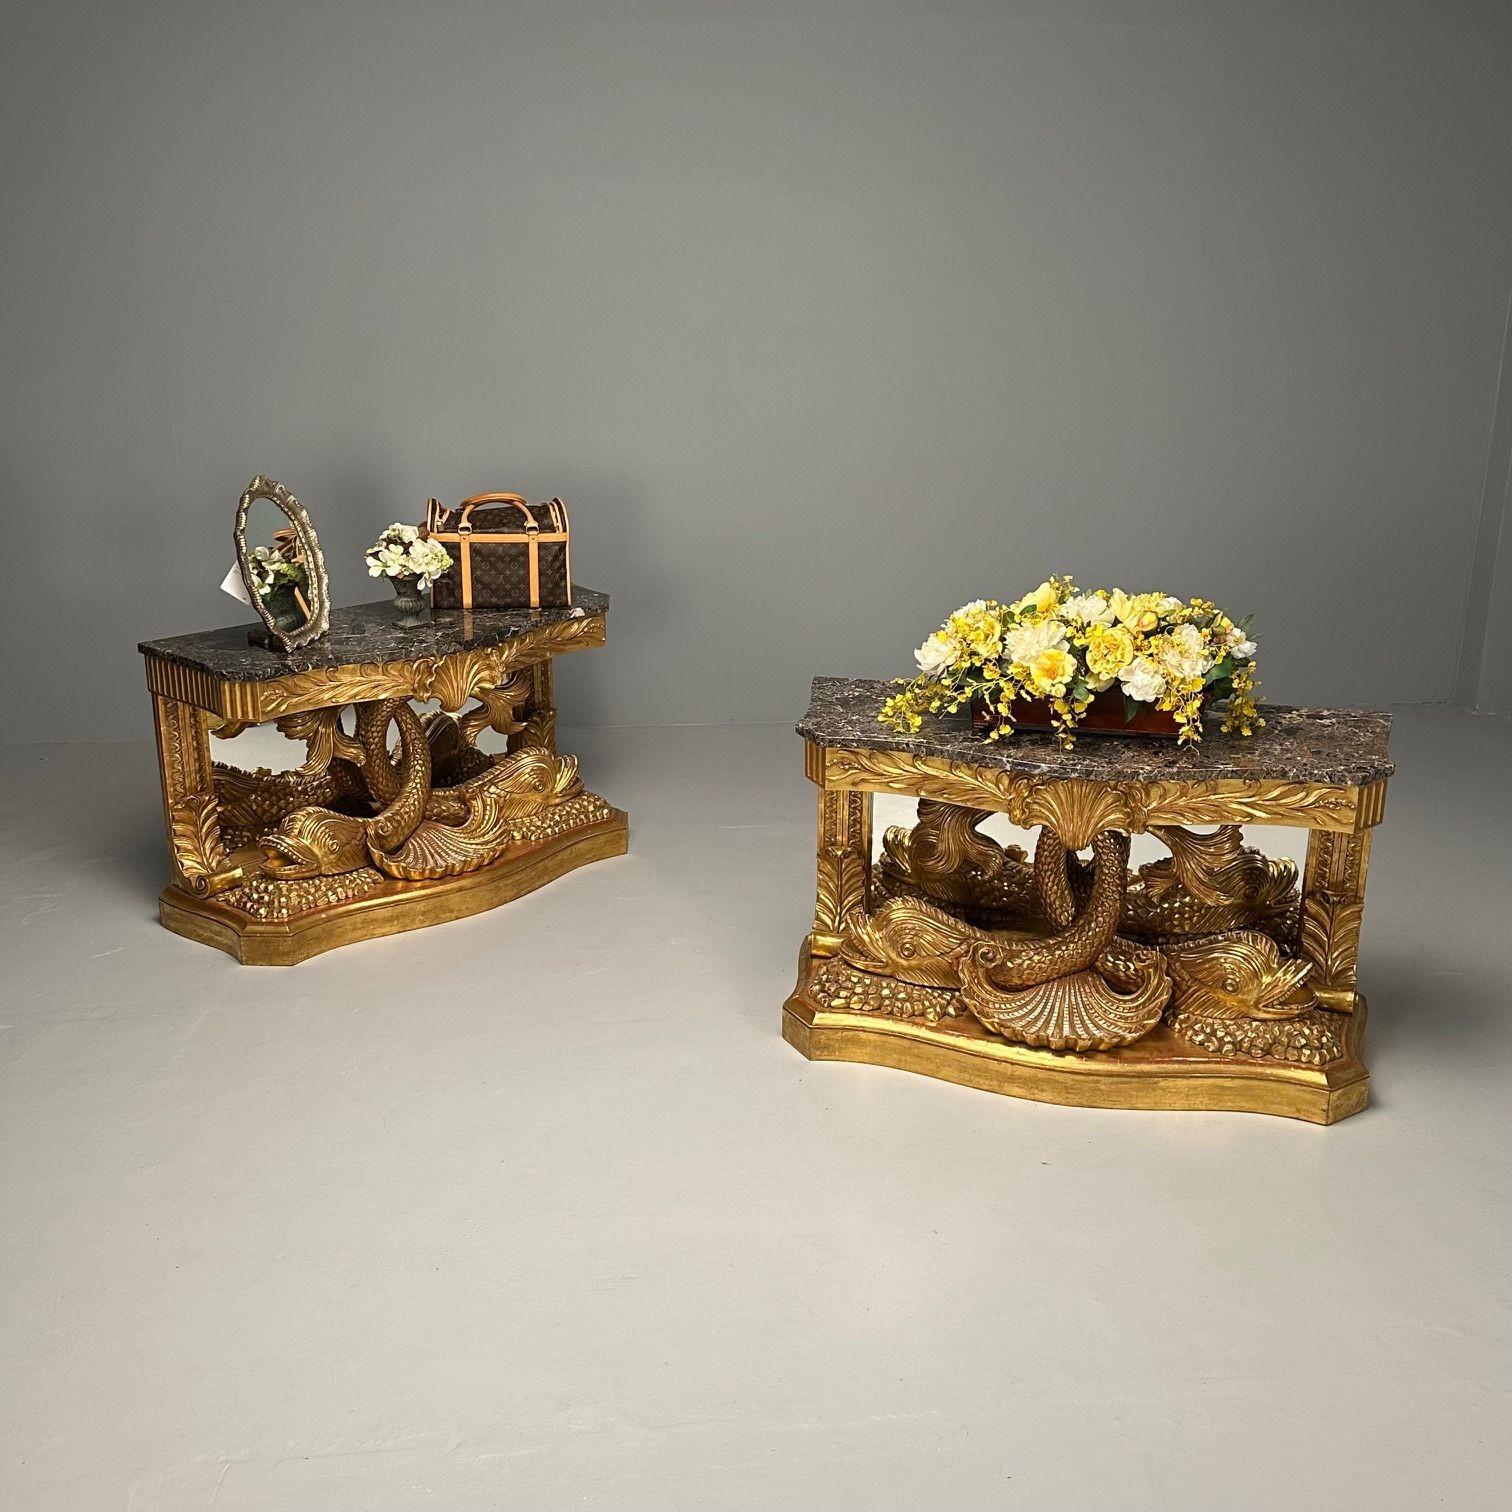 Pair of French Wood Carved Dolphin Console Tables, Marble Top, Giltwood, Made in France

A Large and Impressive pair of full bodied Dolphin solid wood carved console or pier tables. Each on a curved fine water gilt over clay base having opposing